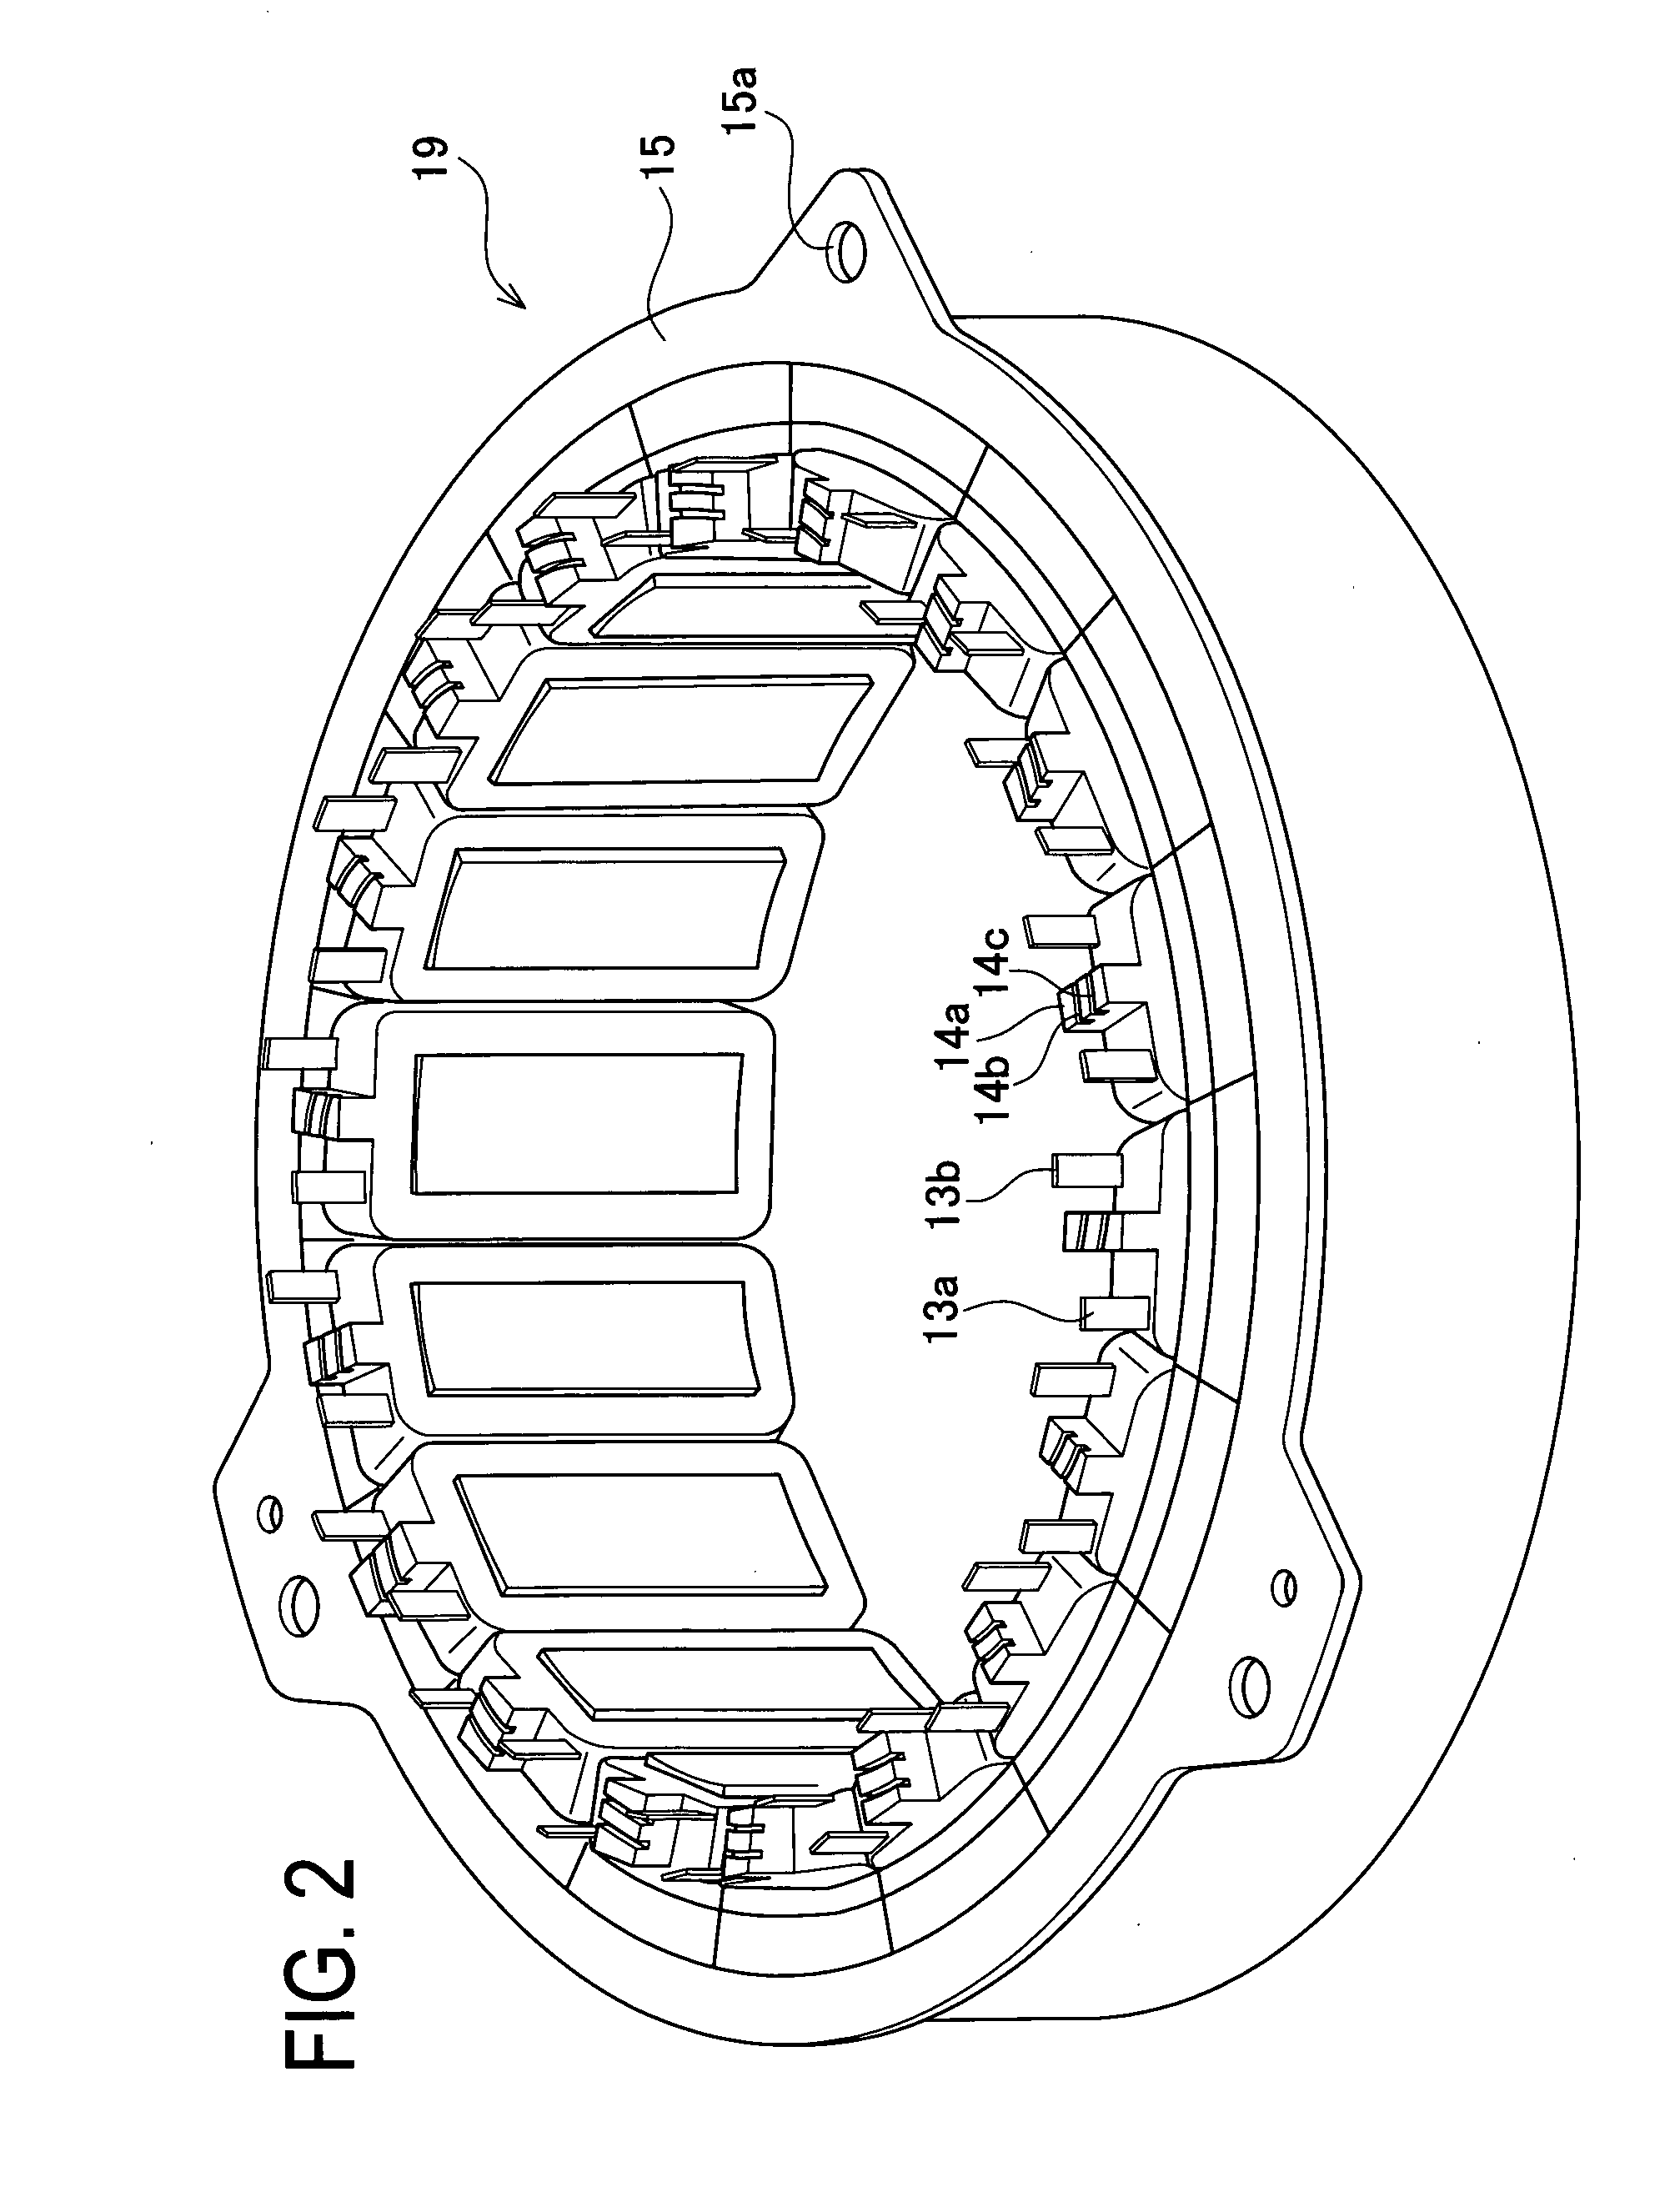 Stator structure